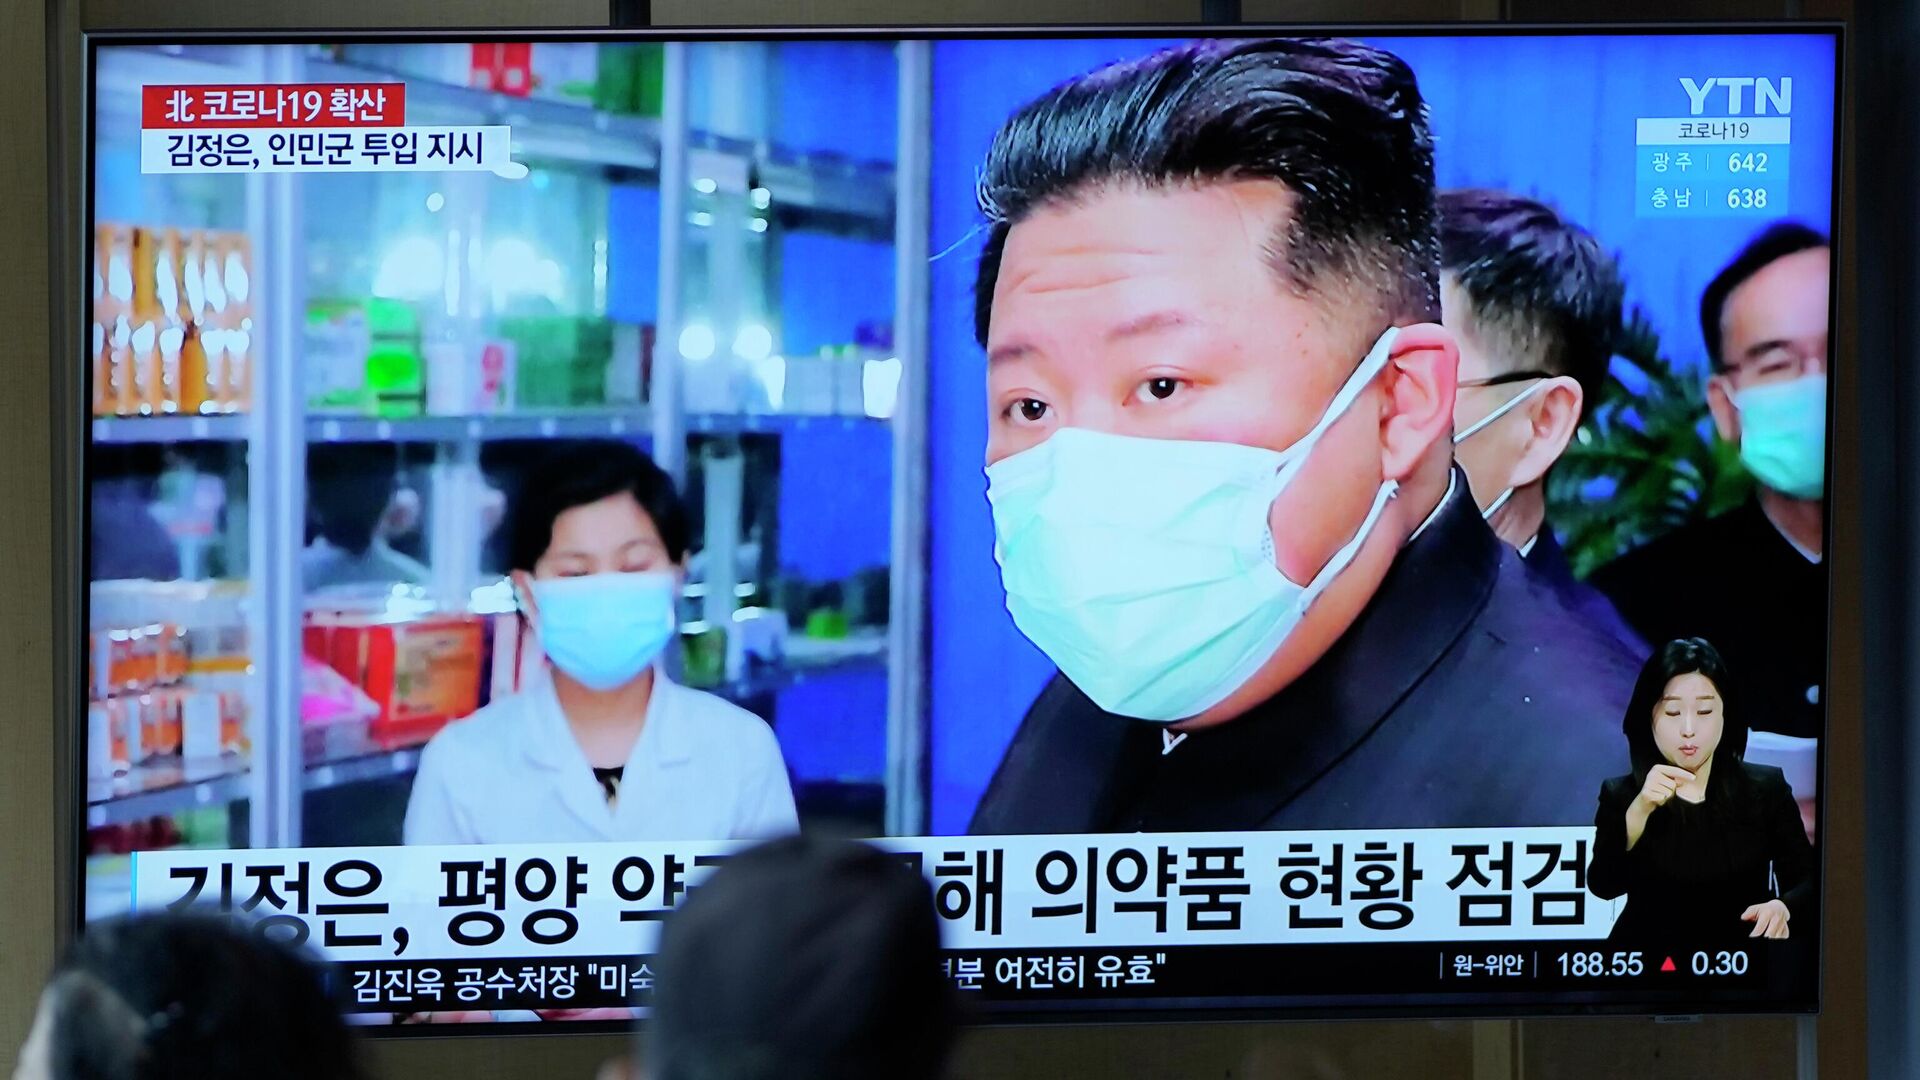 FILE - People watch a TV screen showing a news program reporting with an image of North Korean leader Kim Jong Un, at a train station in Seoul, South Korea on May 16, 2022 - Sputnik International, 1920, 17.05.2022